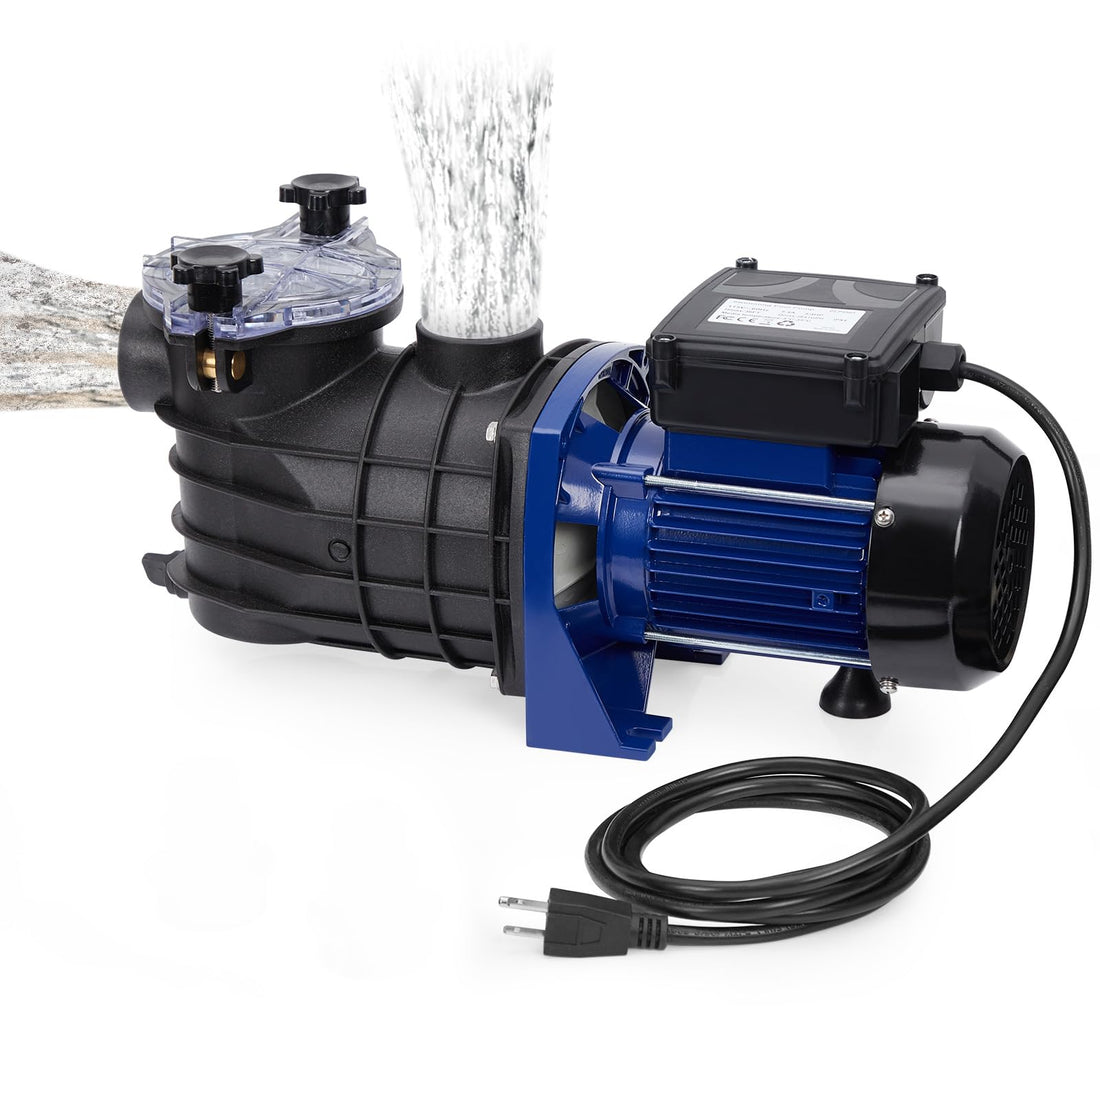 0.75HP 550W Pool Pump for In/Above Ground, Single Speed